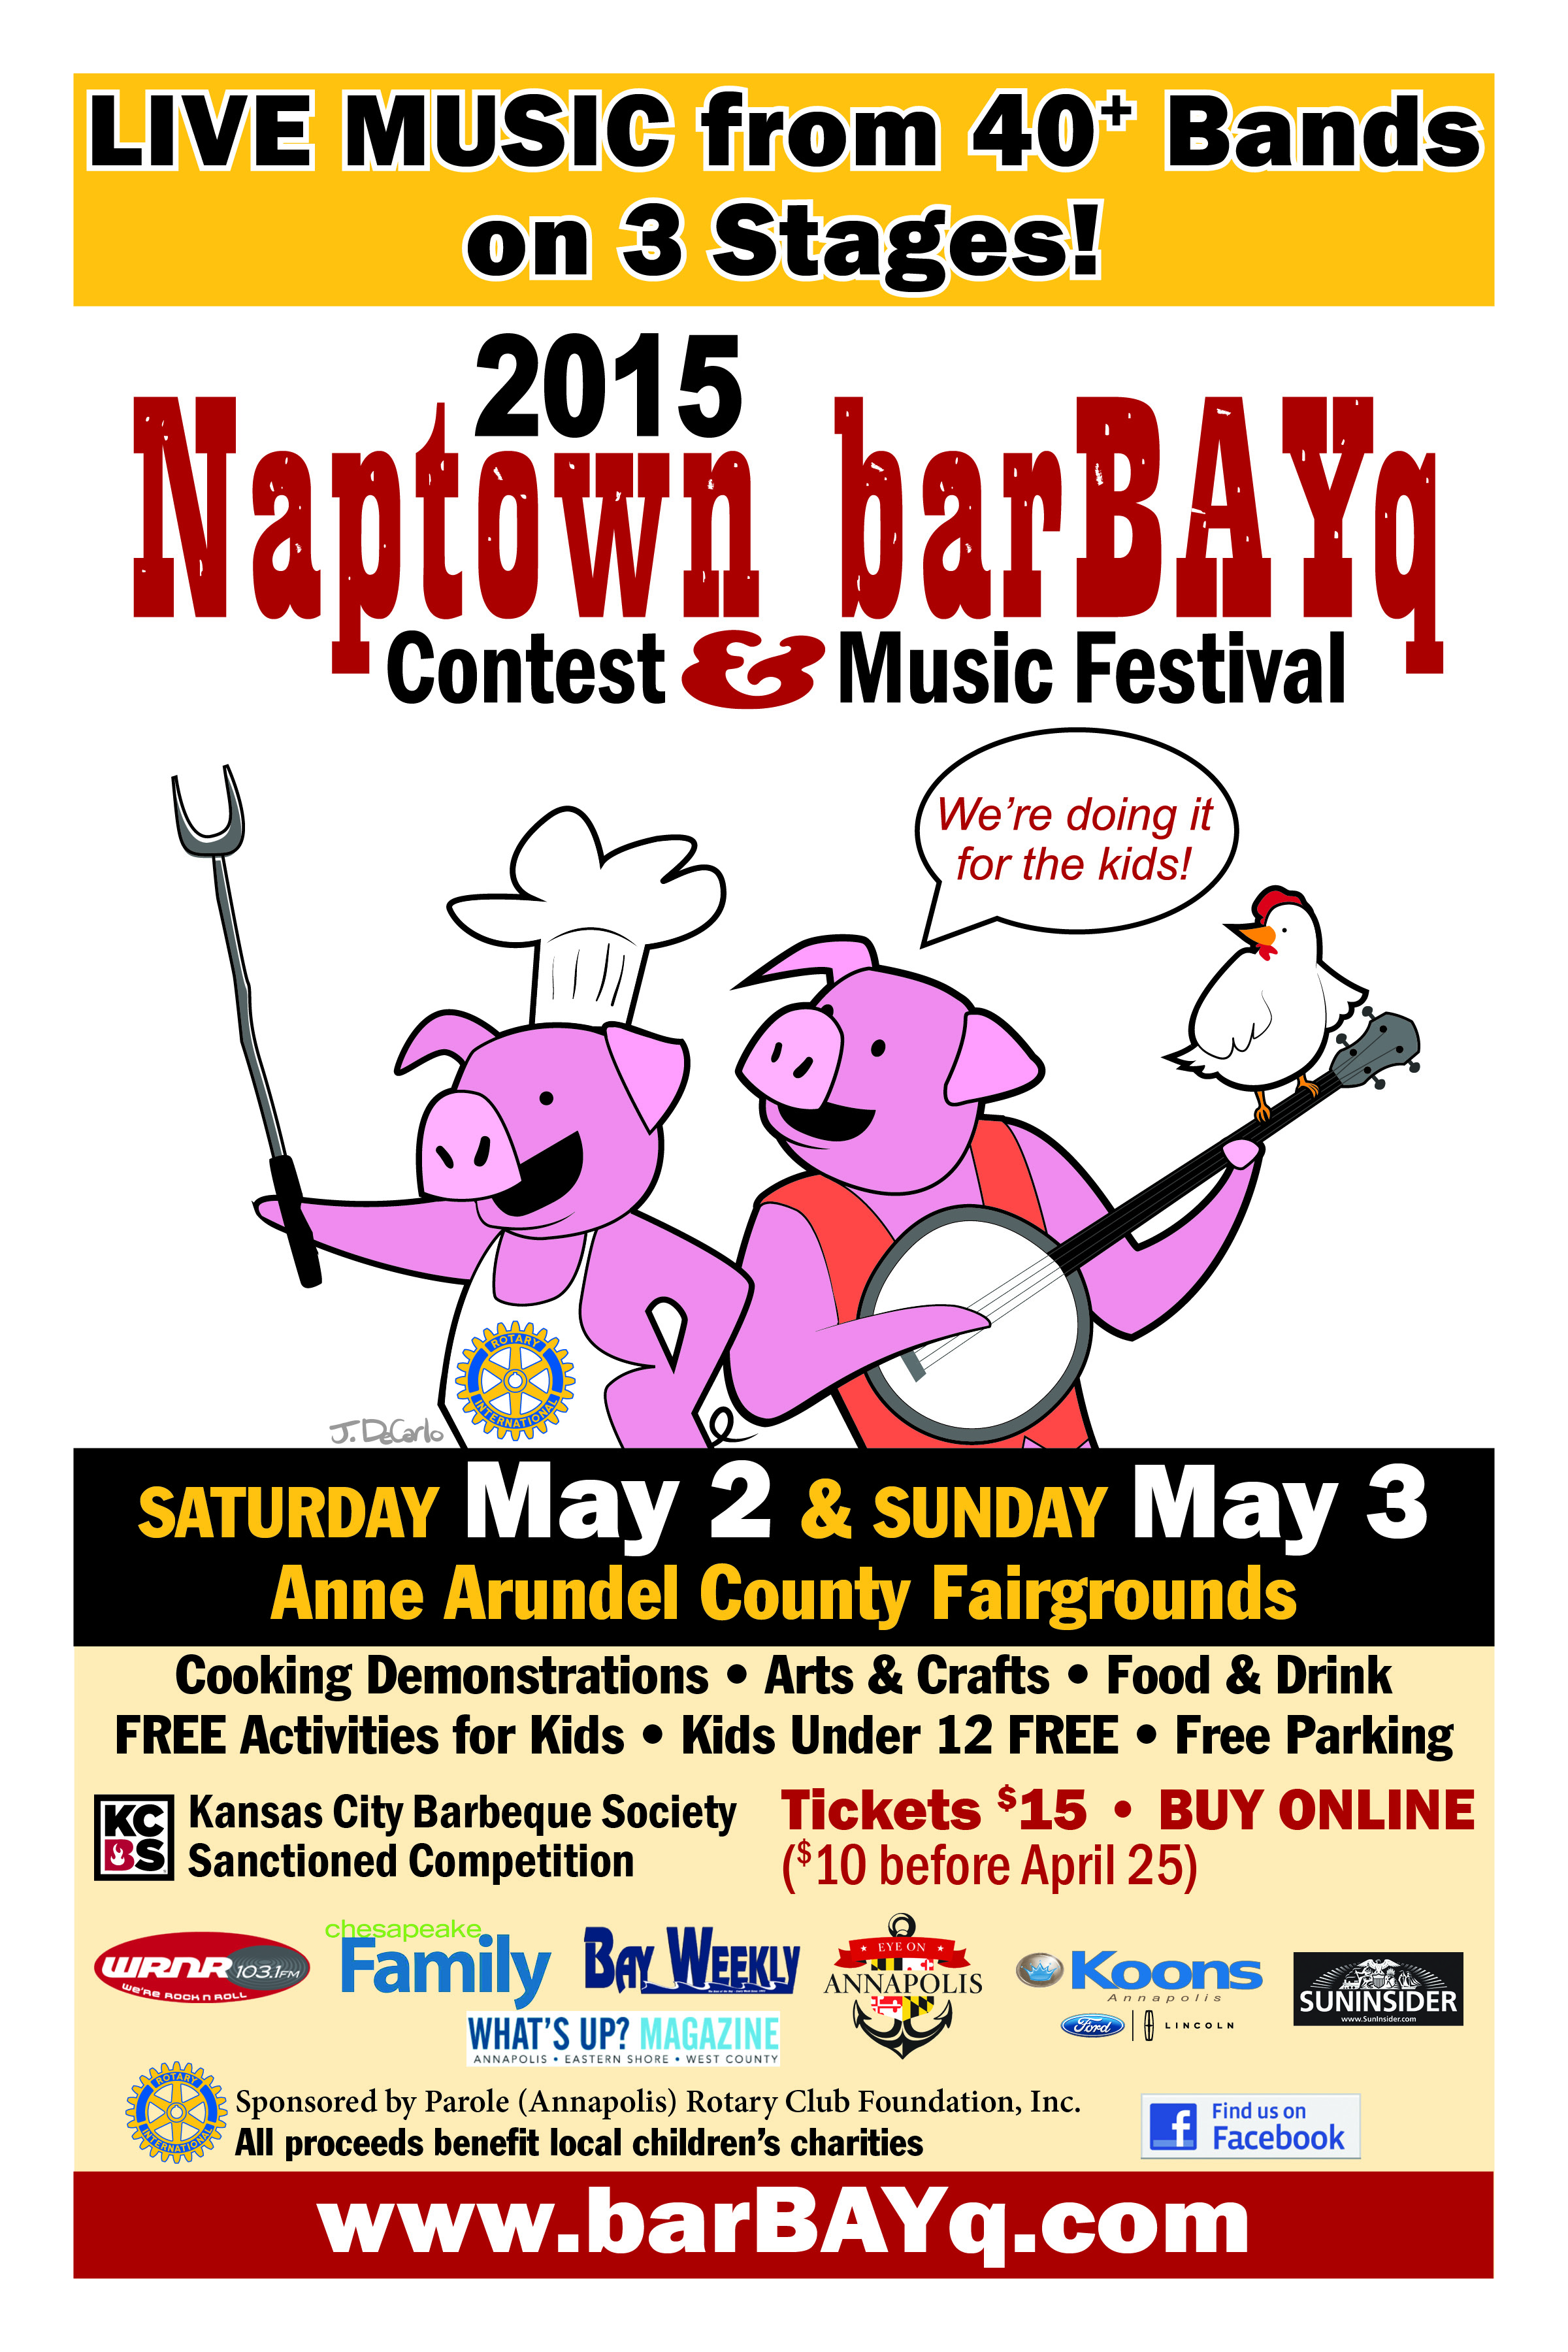 Plans are underway for the 5th Annual Naptown BarBAYq Contest & Music